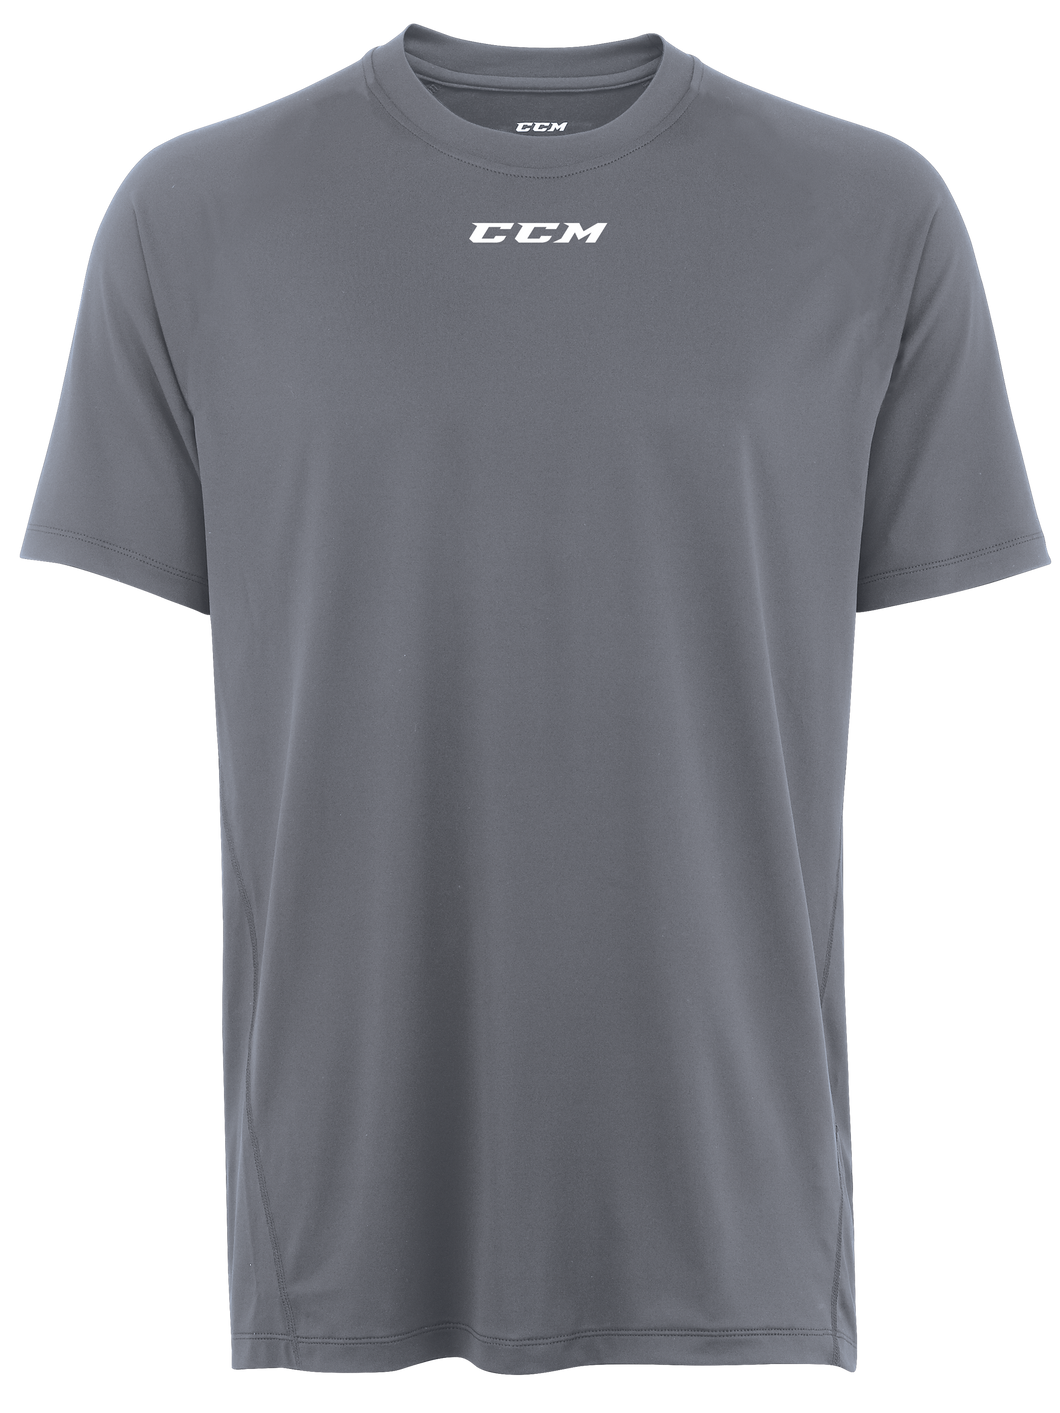 CCM Youth Price Point Tech Top